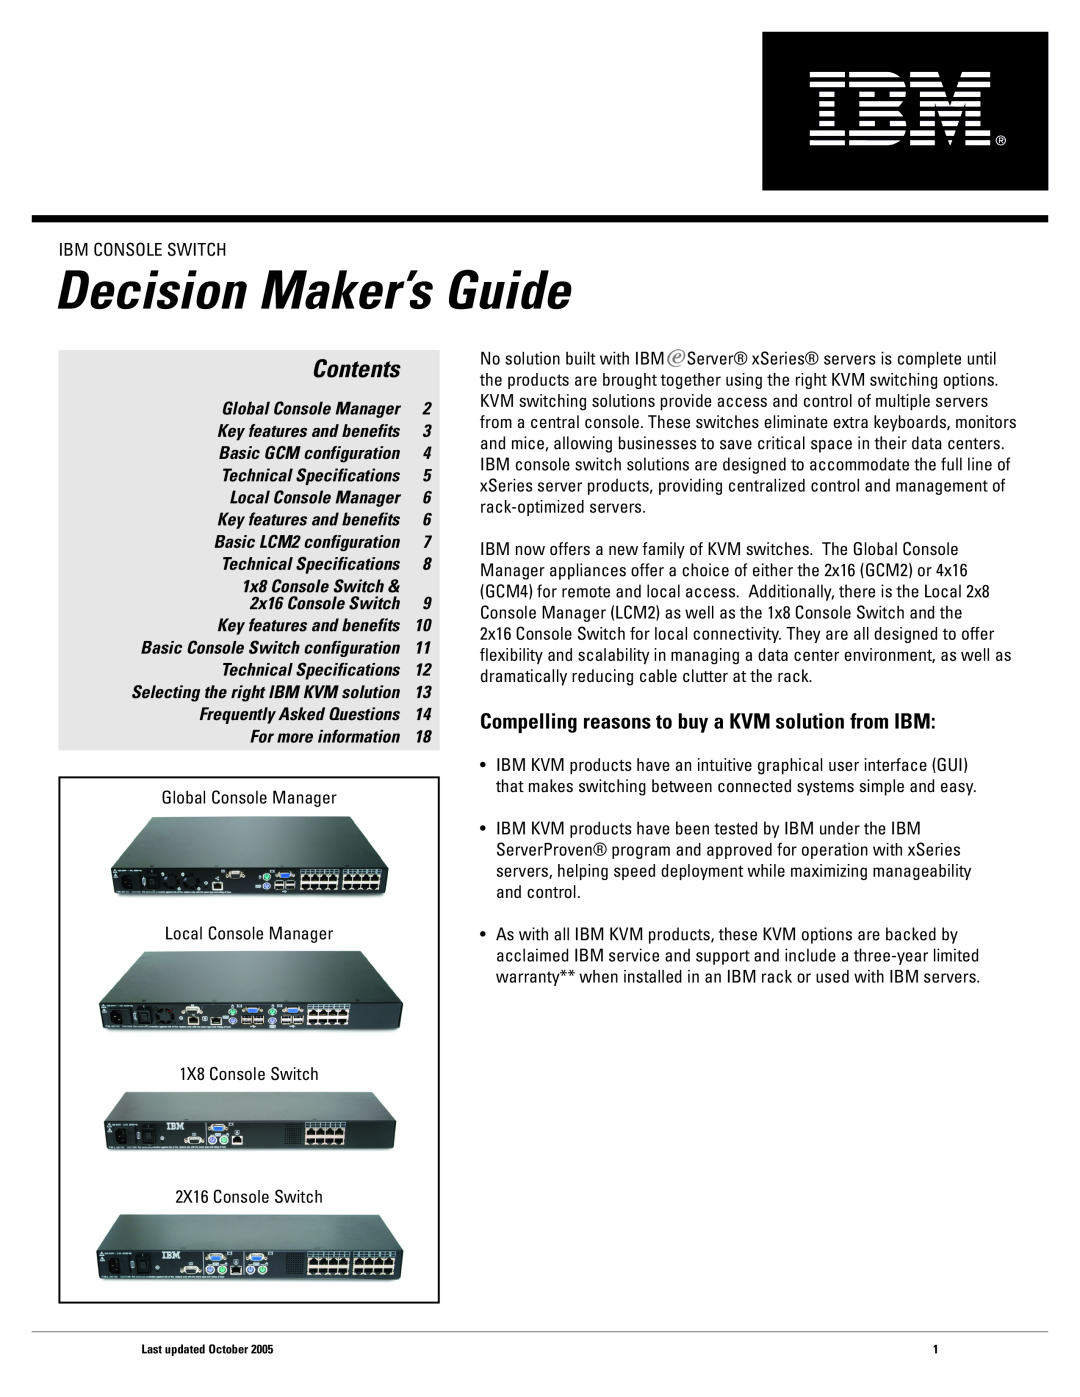 IBM 1X8, 2X16 warranty Compelling reasons to buy a KVM solution from IBM, Decision Maker’s Guide, Contents 